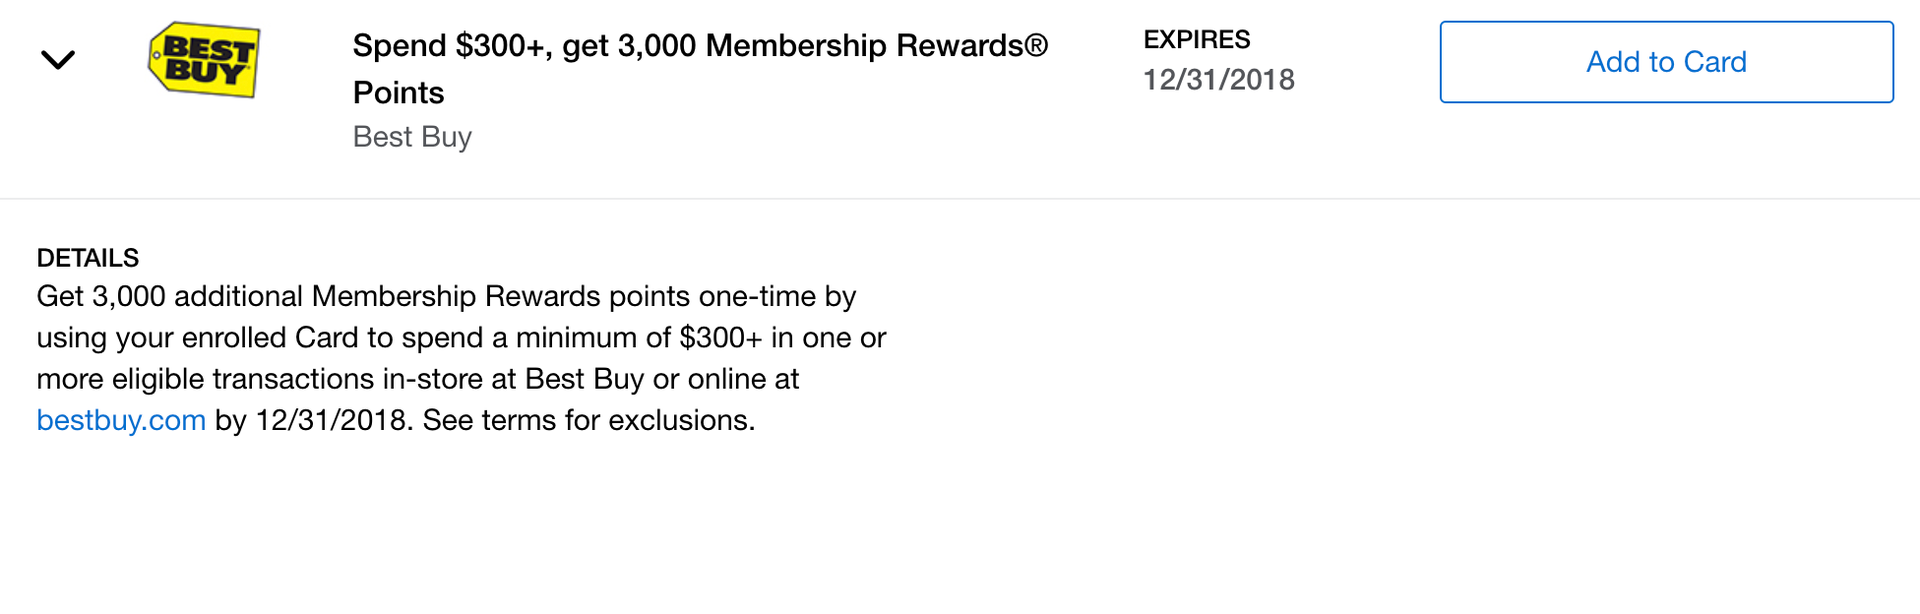 Amex Offer 3,000 Membership Rewards Points After Spending 300 at Best